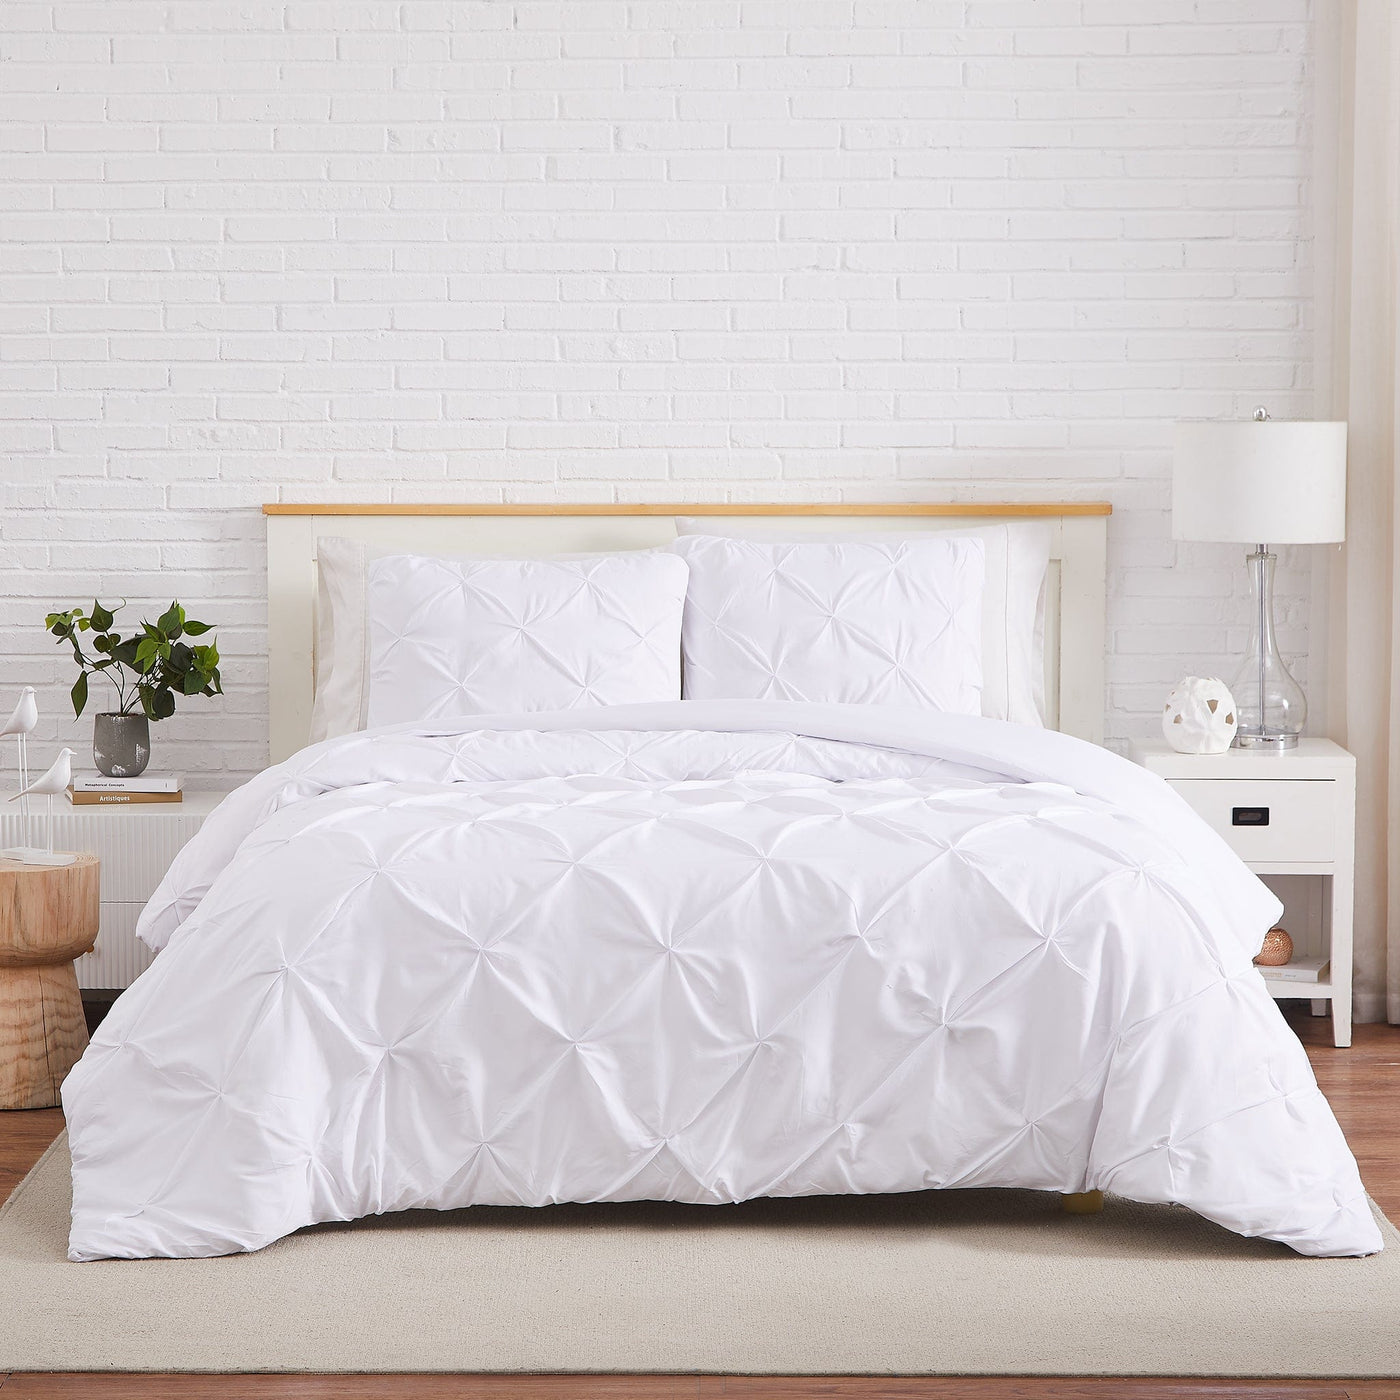 Front View of Pintuck Pinch Pleated Duvet Cover Set in White#color_vilano-bright-white